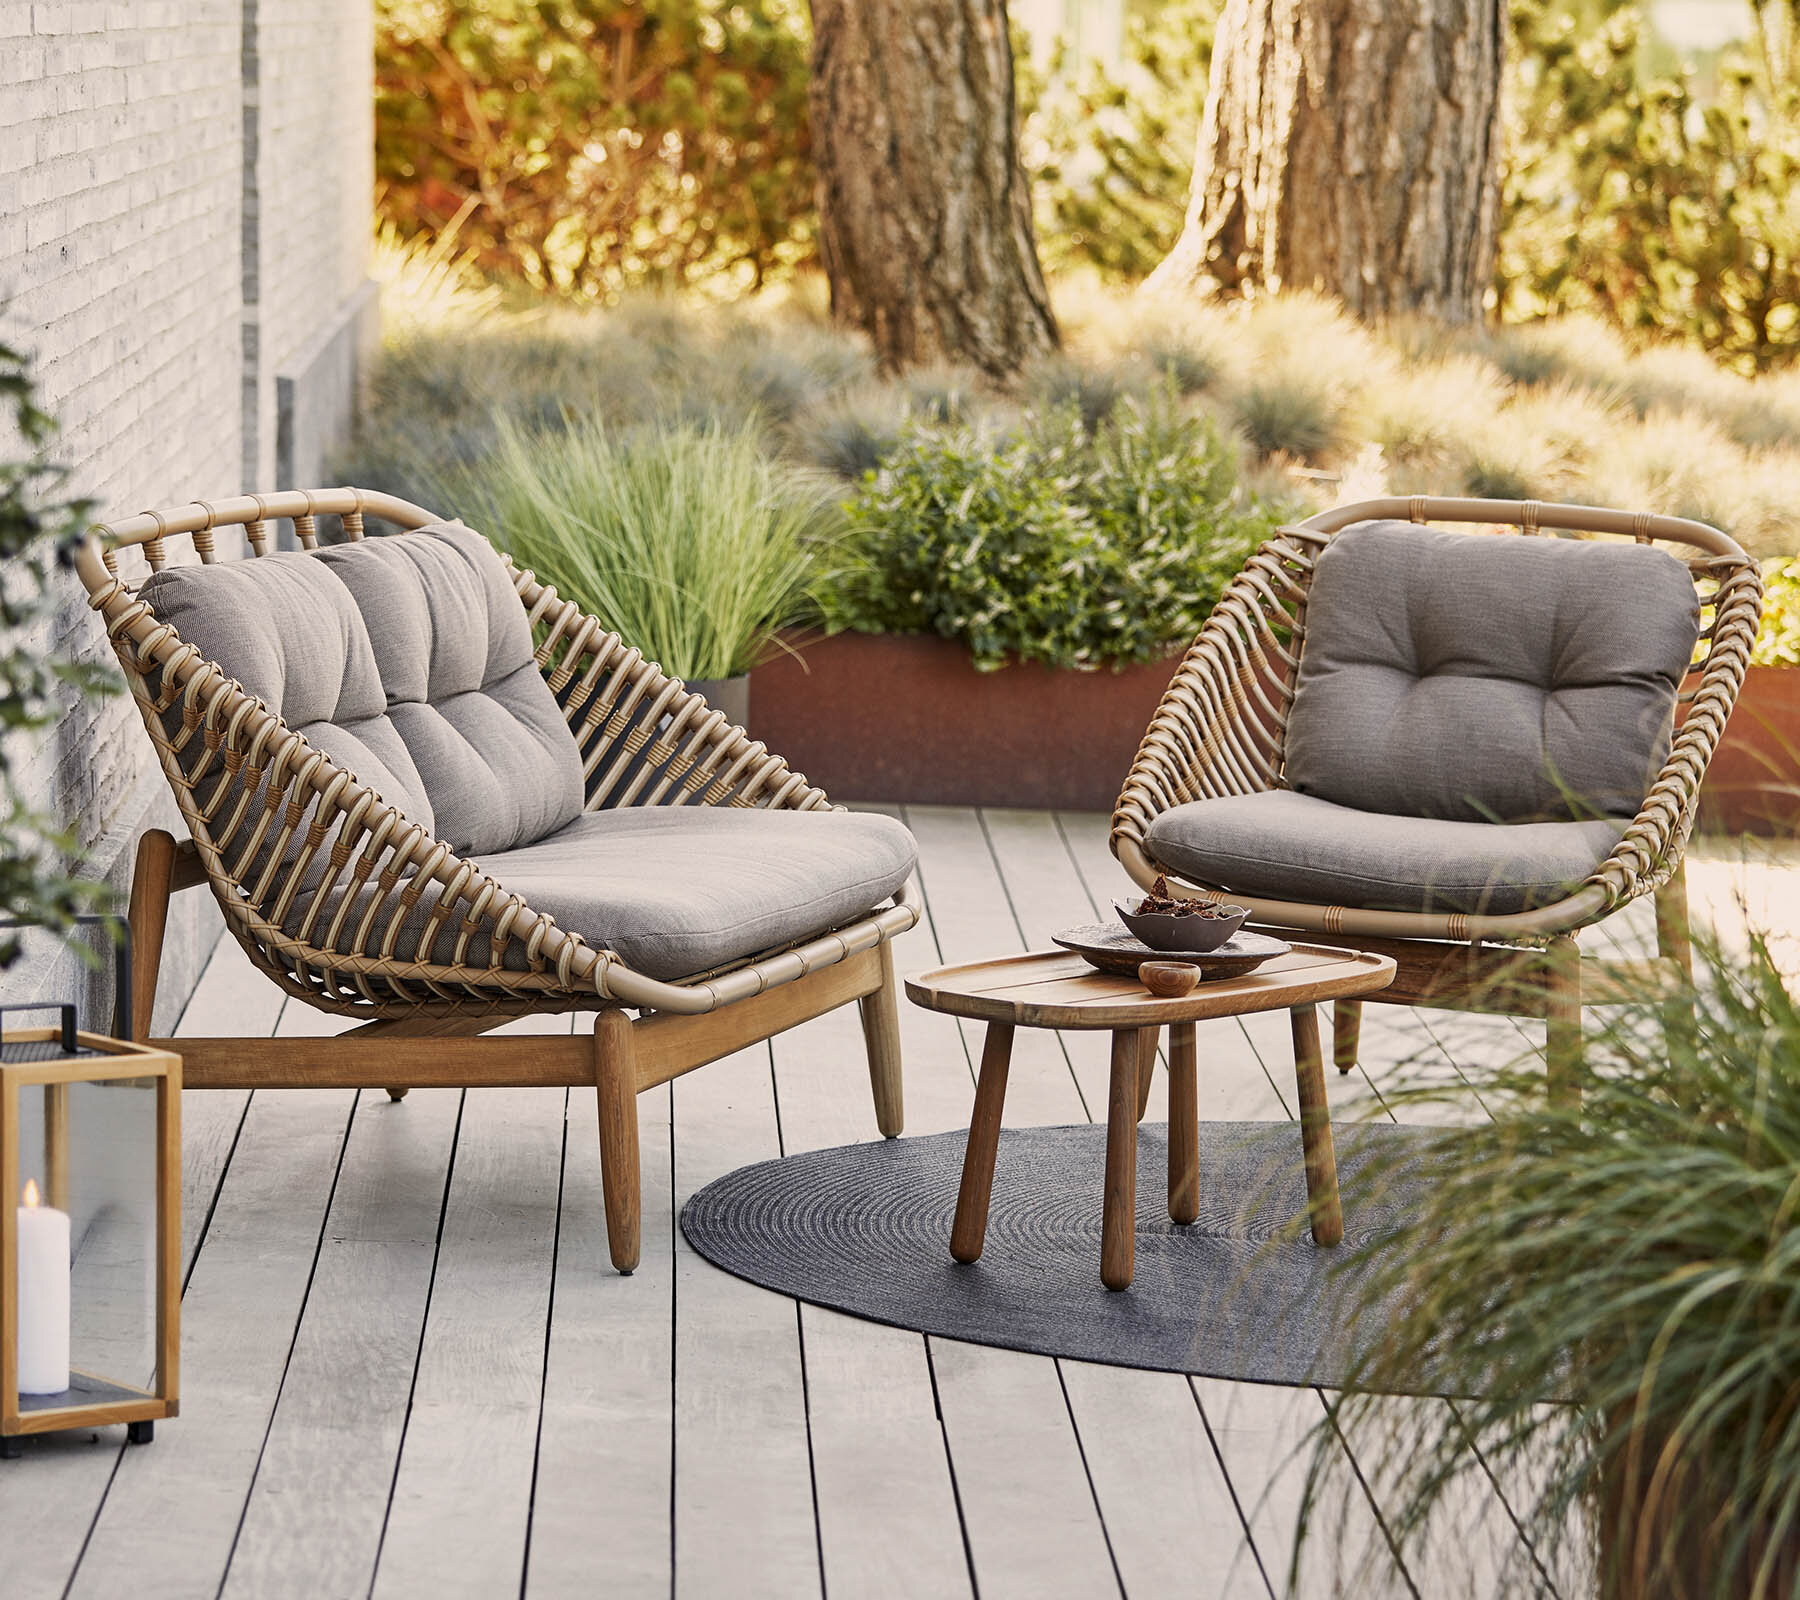 Cane-line String Lounge chair